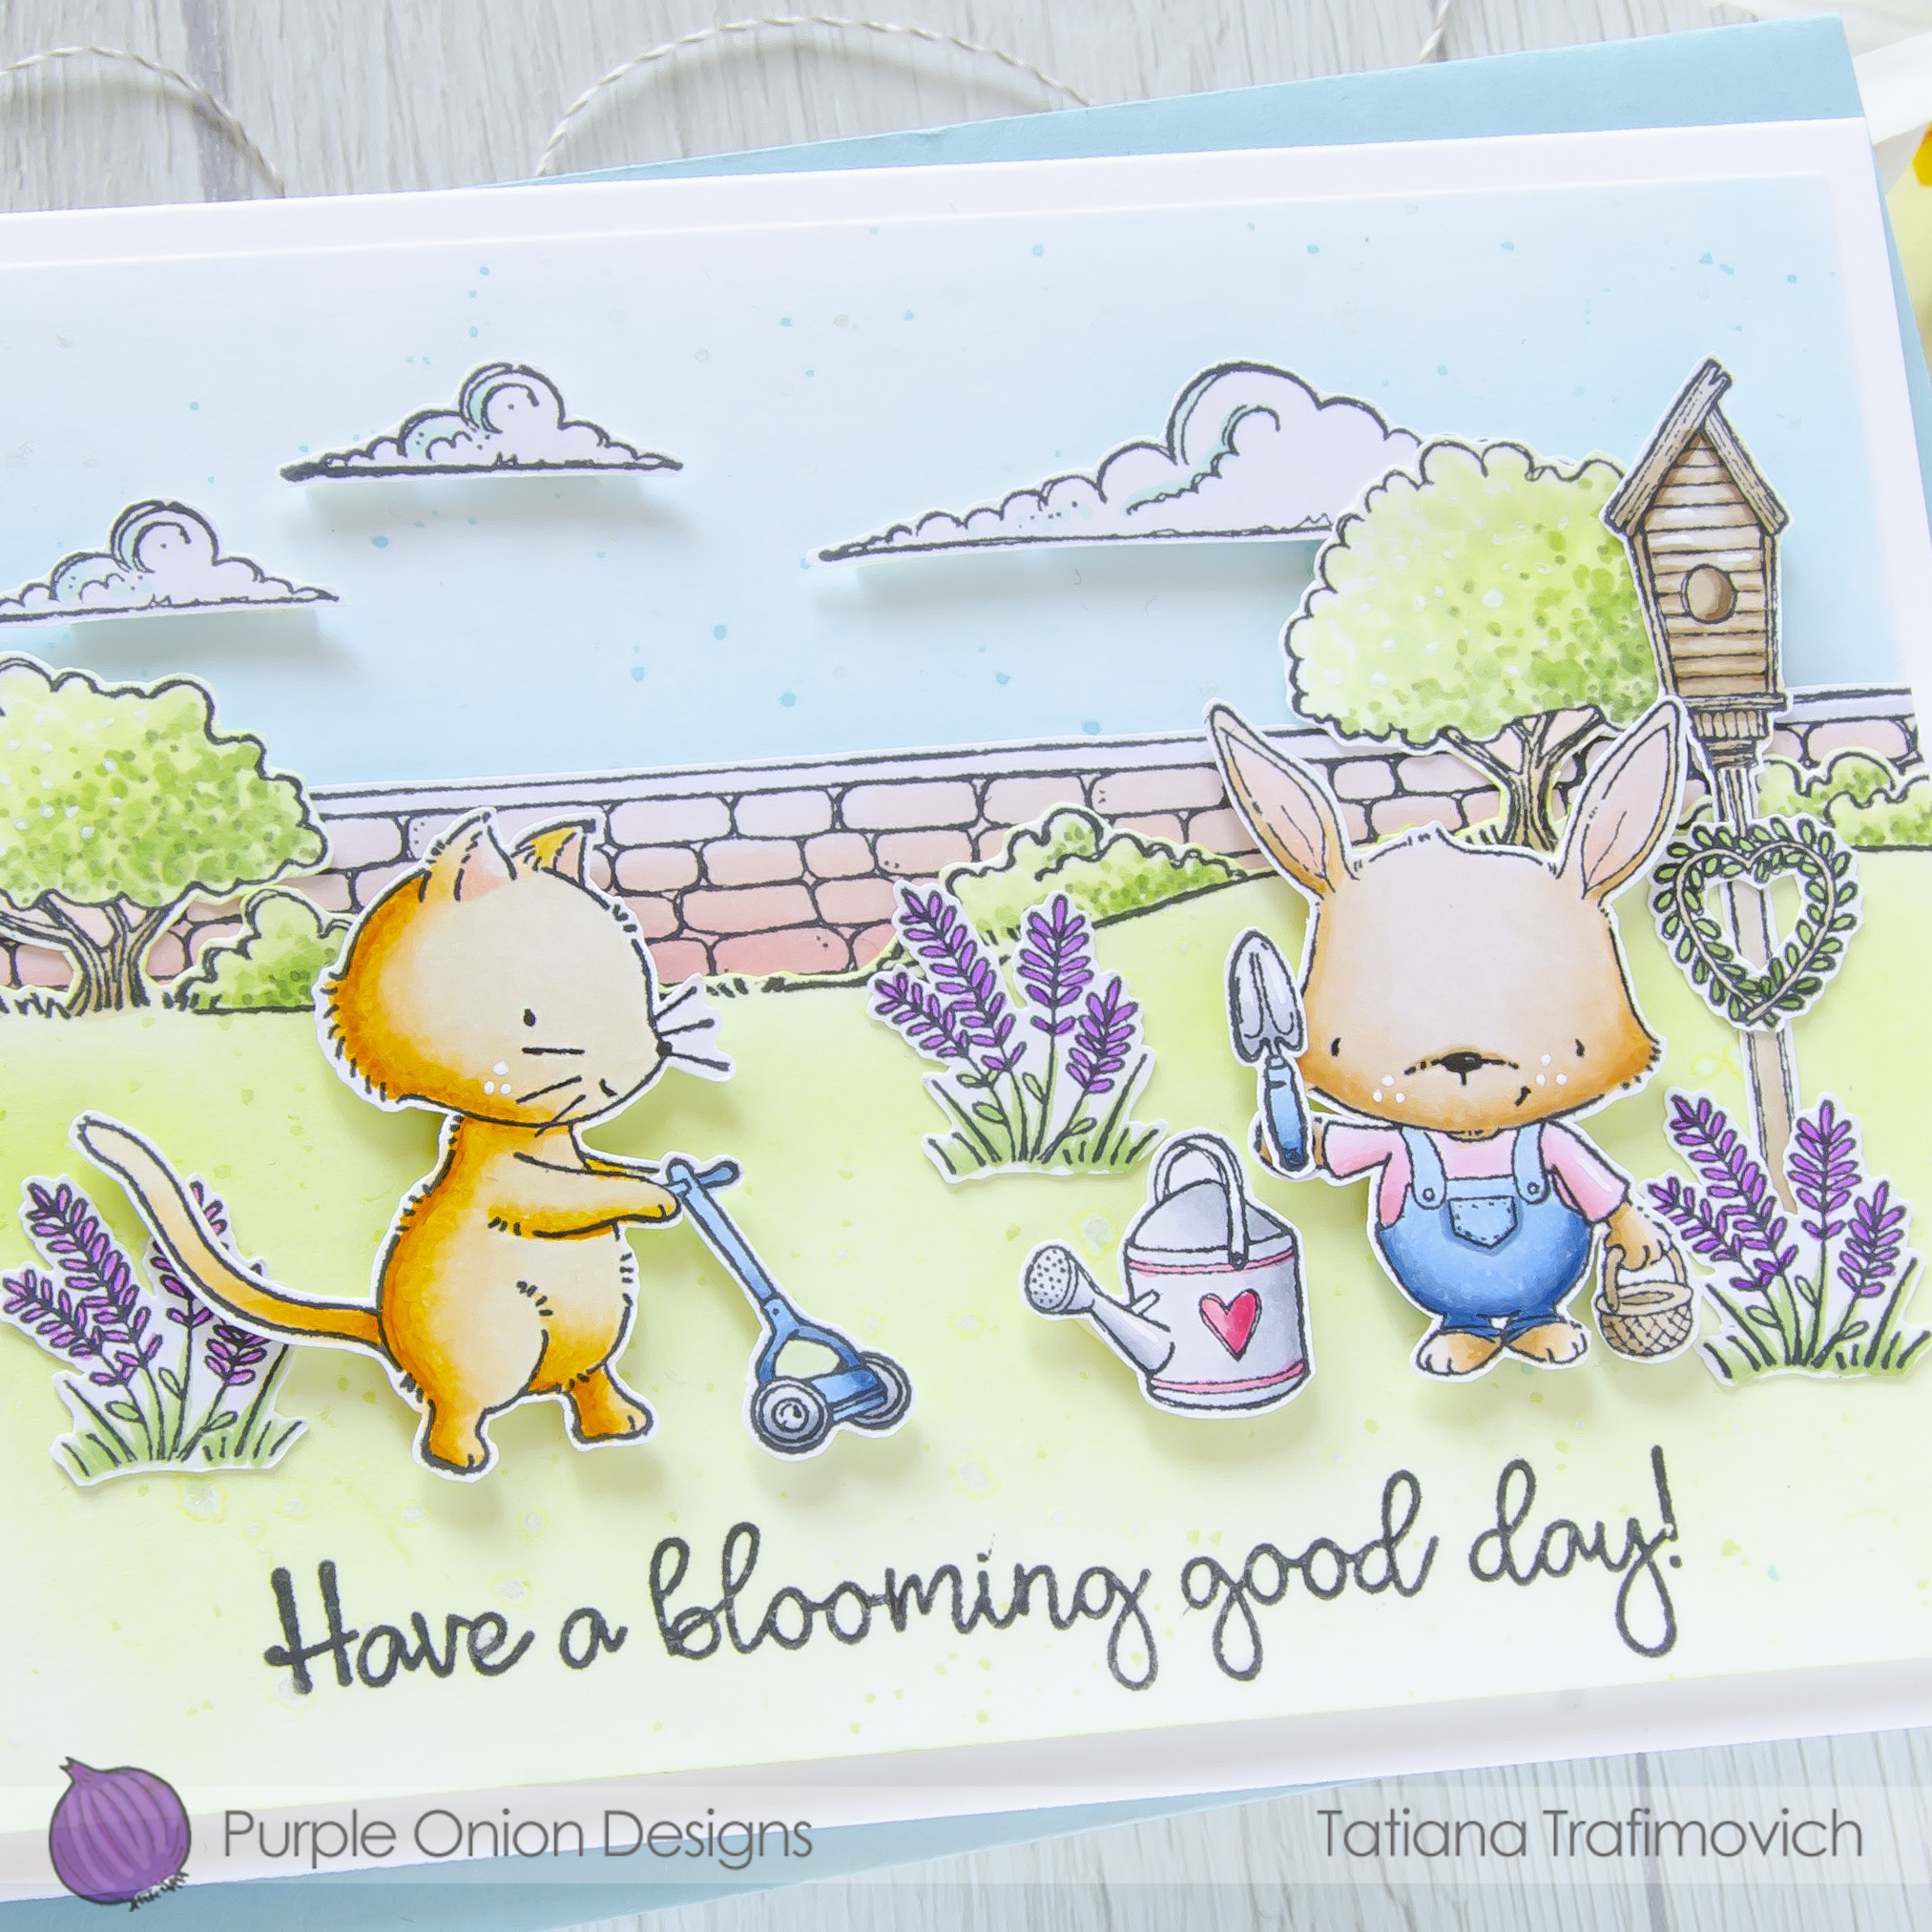 Have A Blooming Good Day! #handmade card by Tatiana Trafimovich #tatianacraftandart - stamps by Purple Onion Designs